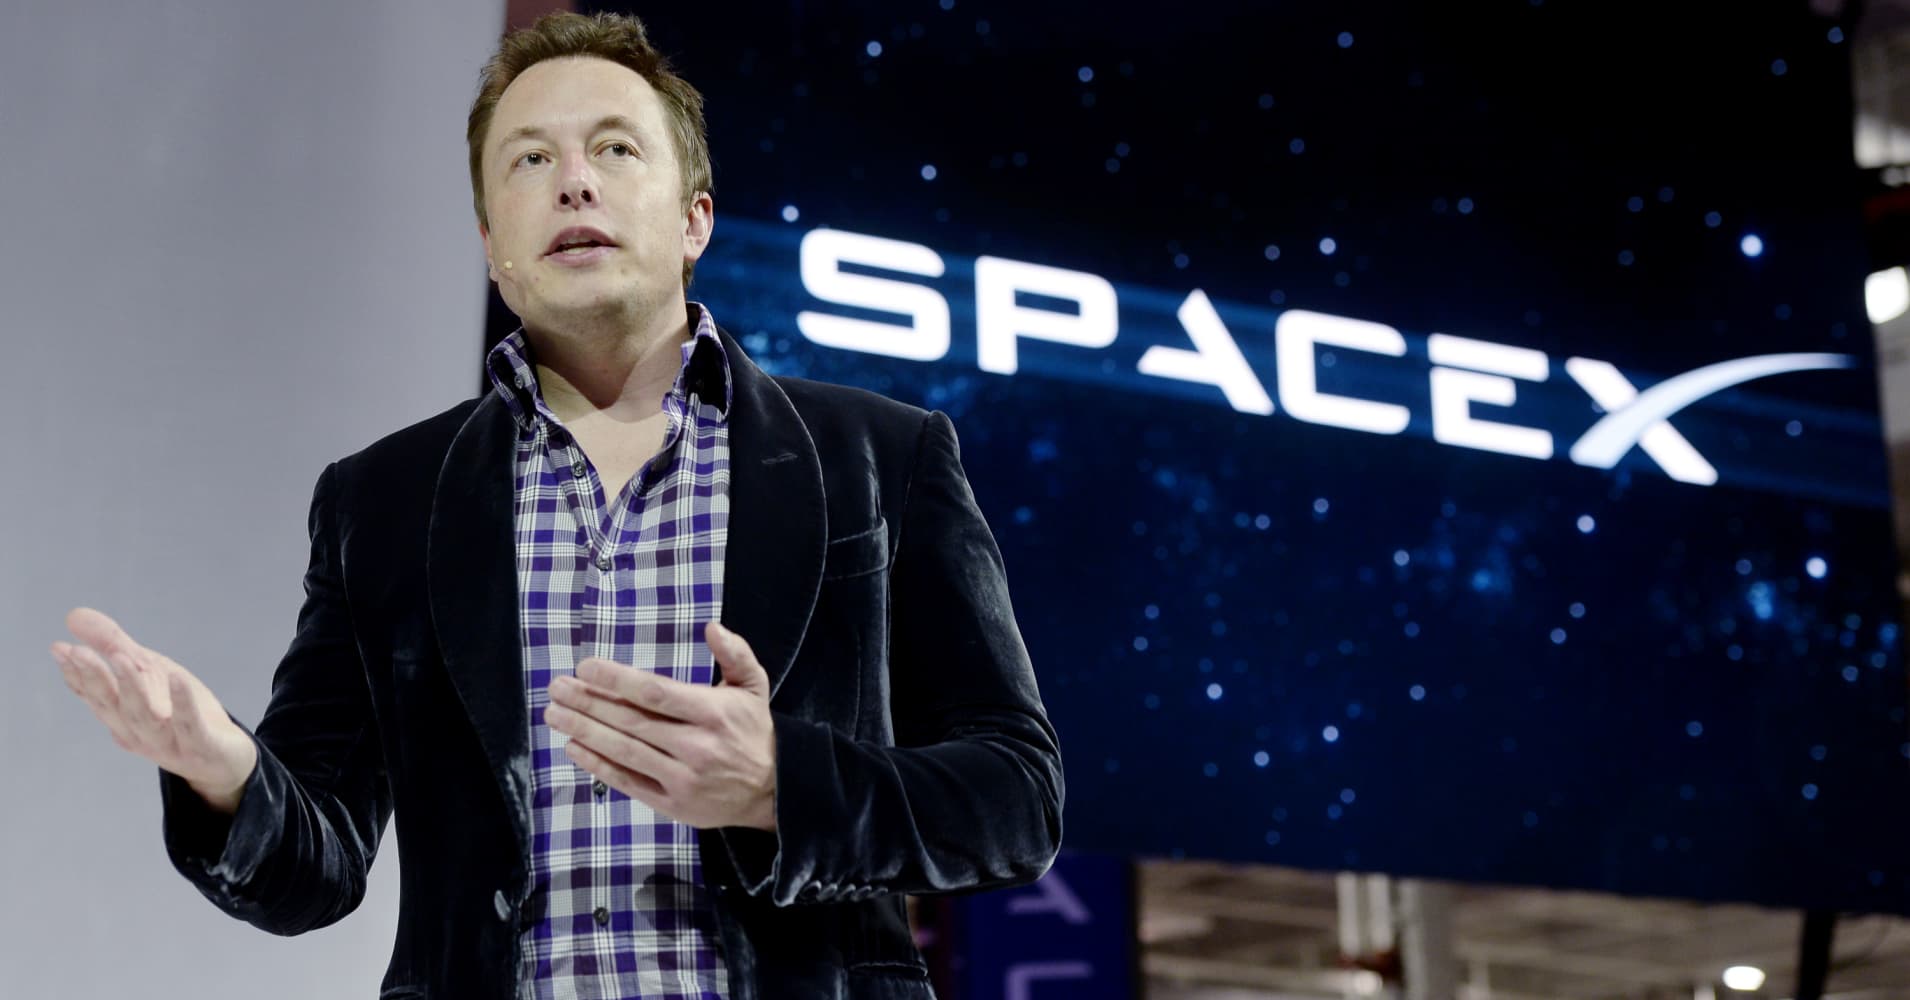 Elon Musk, founder and CEO of SpaceX